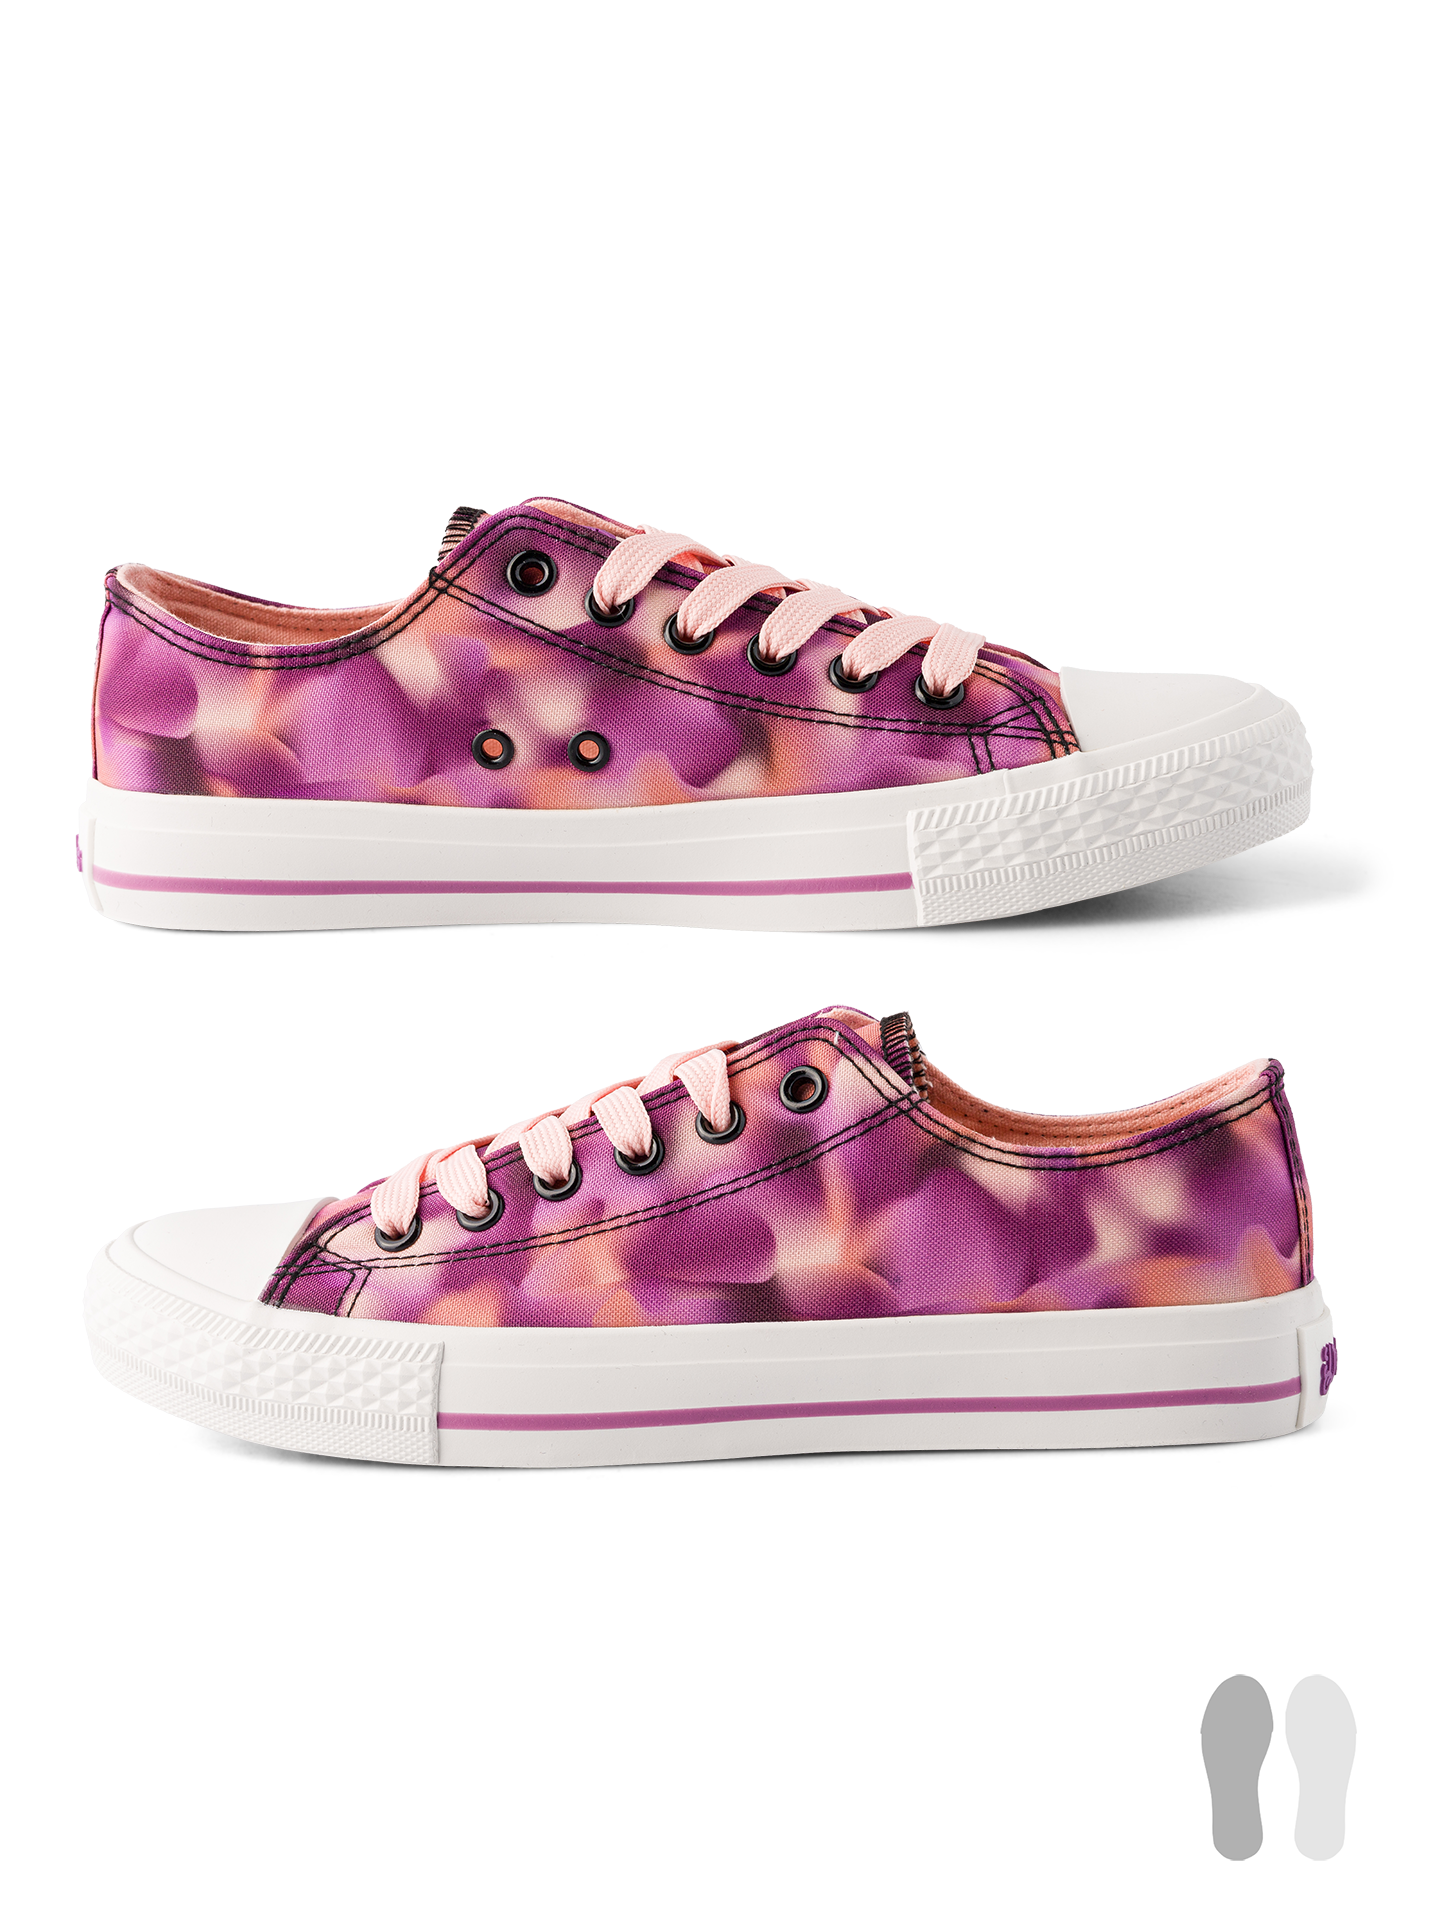 Canvas Shoes Pink Camouflage